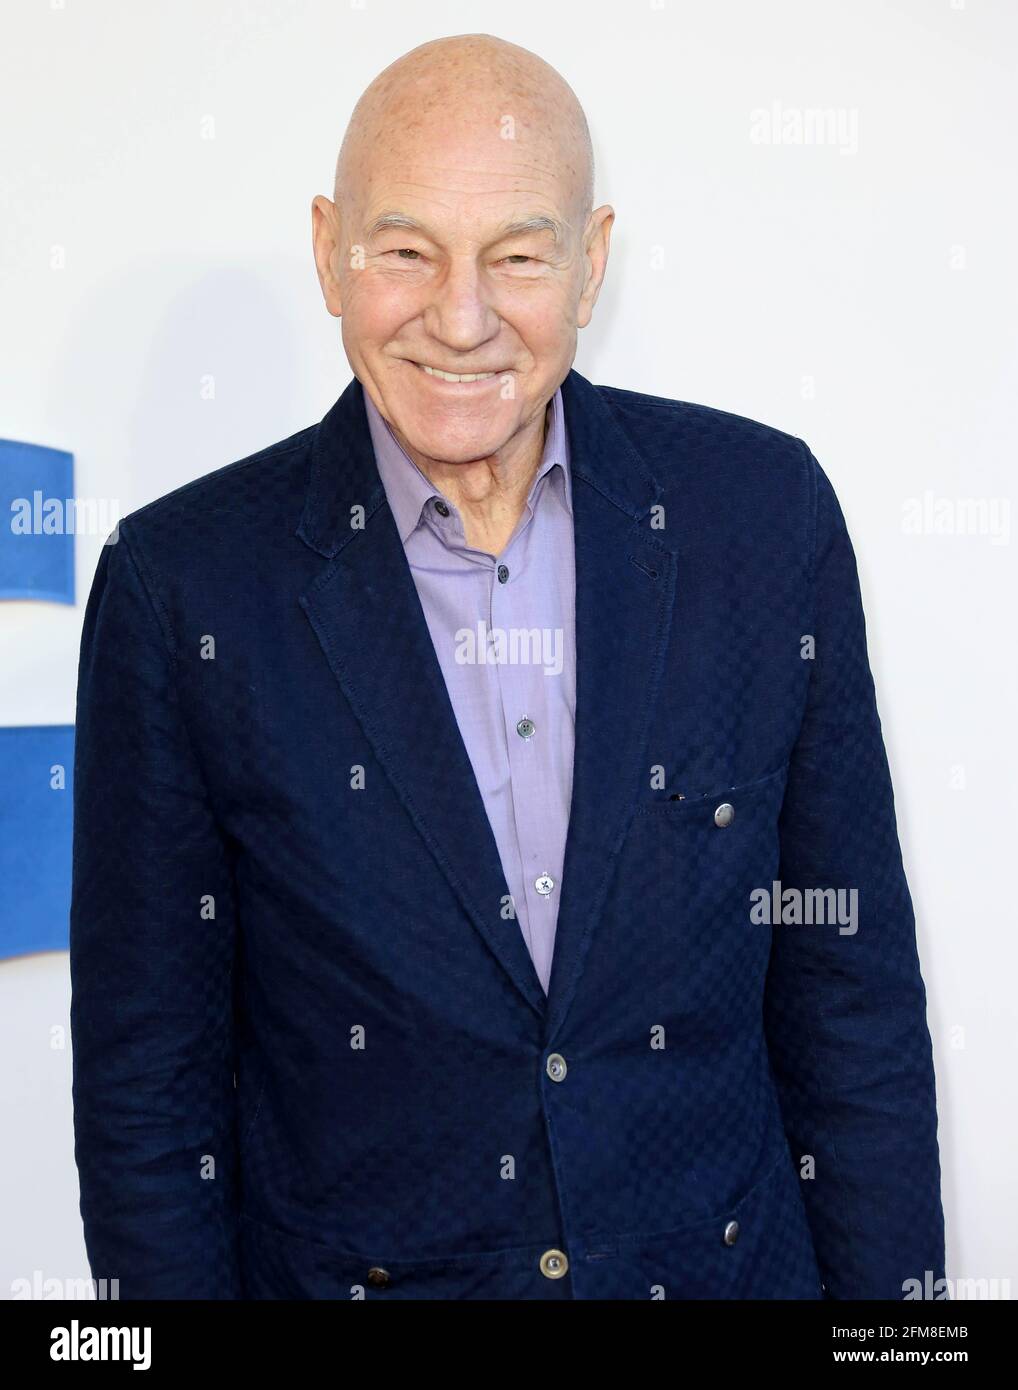 03 févr. 2019 - Londres, Angleterre, Royaume-Uni - The Kid When who serait King Family Gala screening Photos: Patrick Stewart Banque D'Images